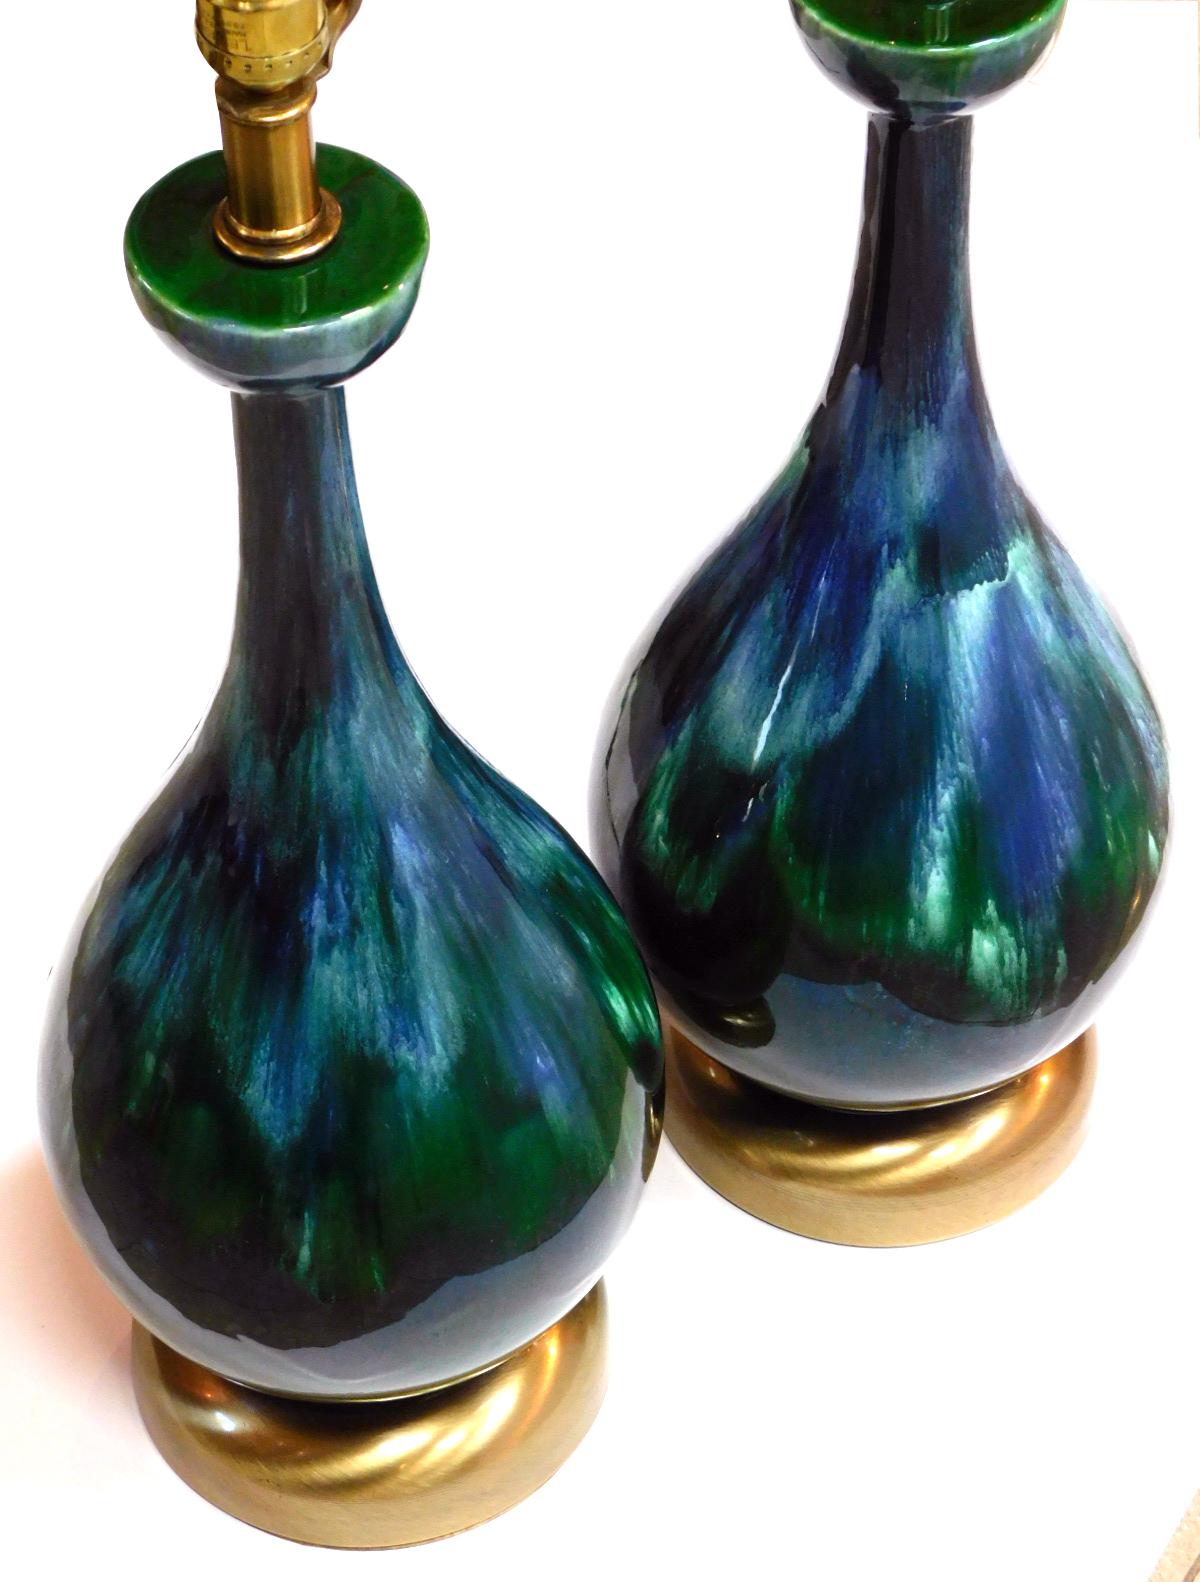 Each tall lamp with striking drip glaze in deep greens and blues; raised on a brushed brass base.